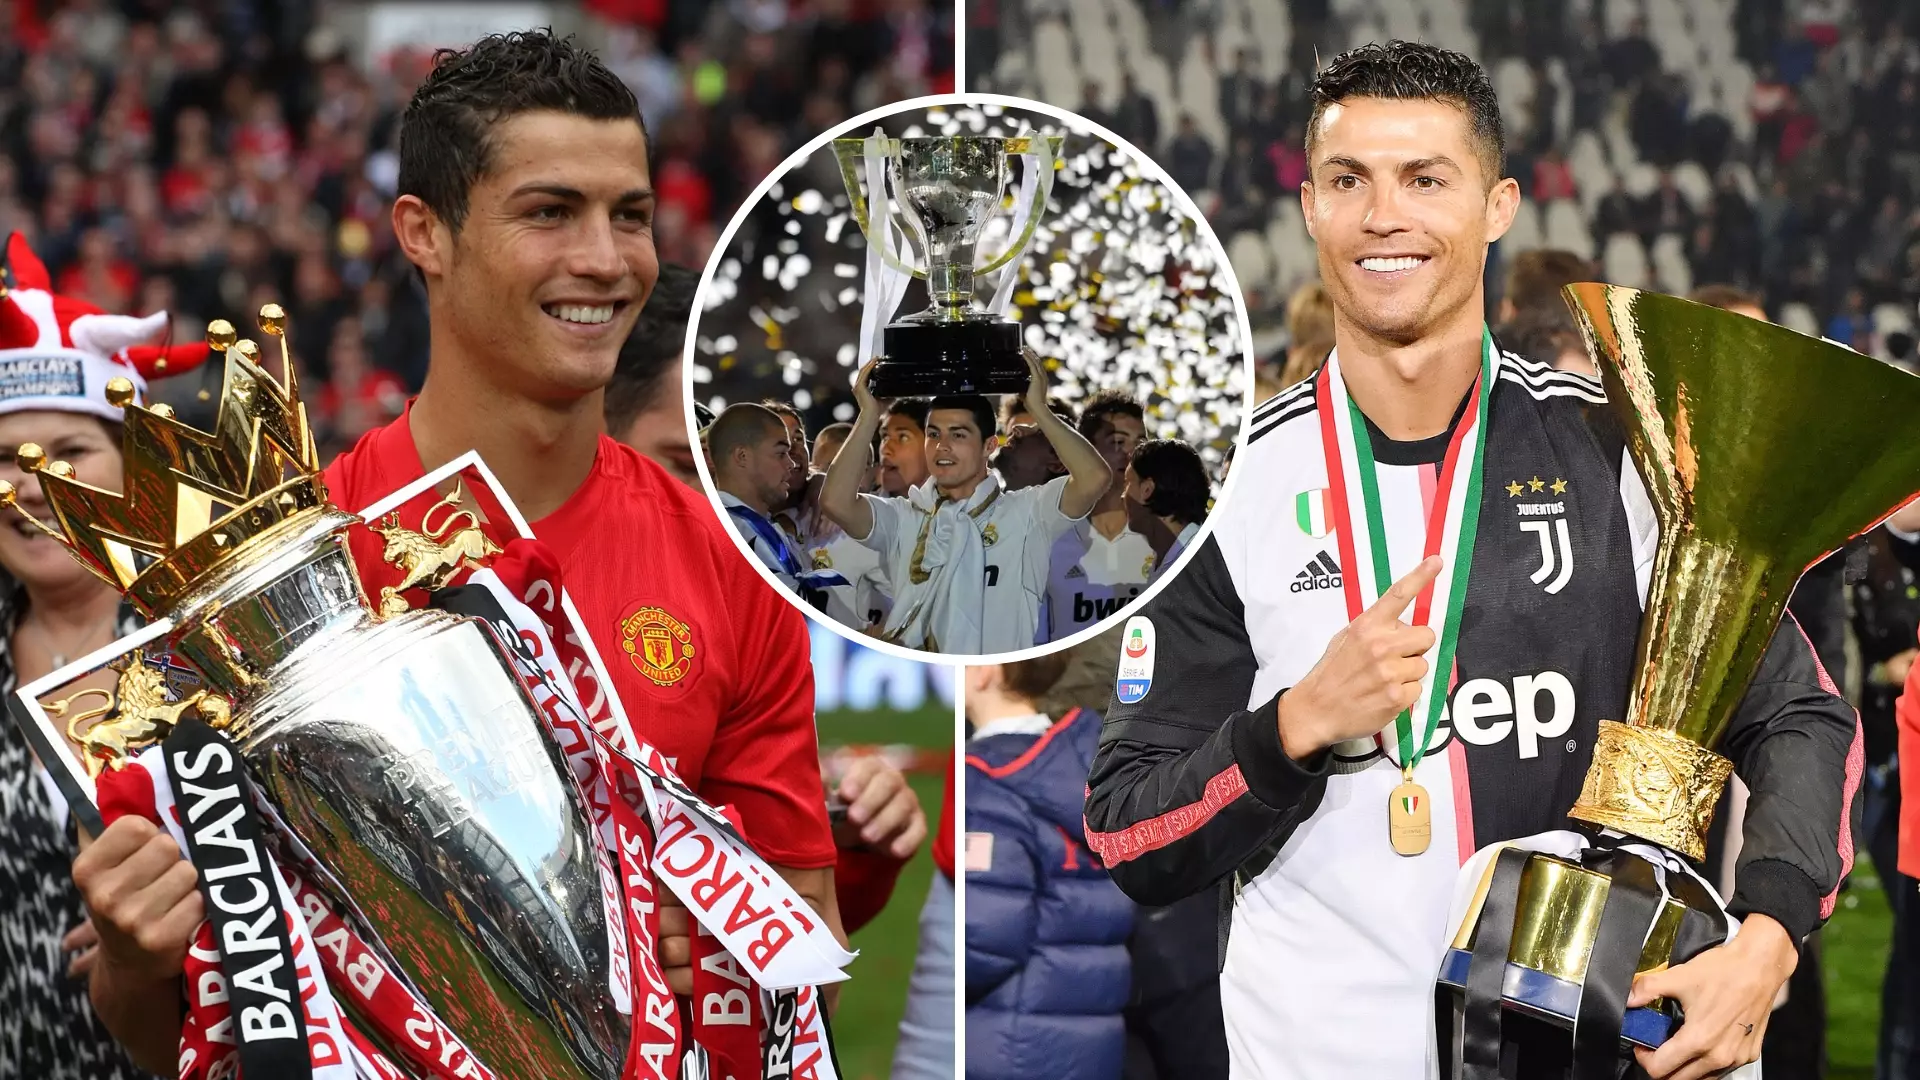 Fan's Twitter Thread Goes Viral After ‘Exposing’ Cristiano Ronaldo For Not 'Conquering' Any League